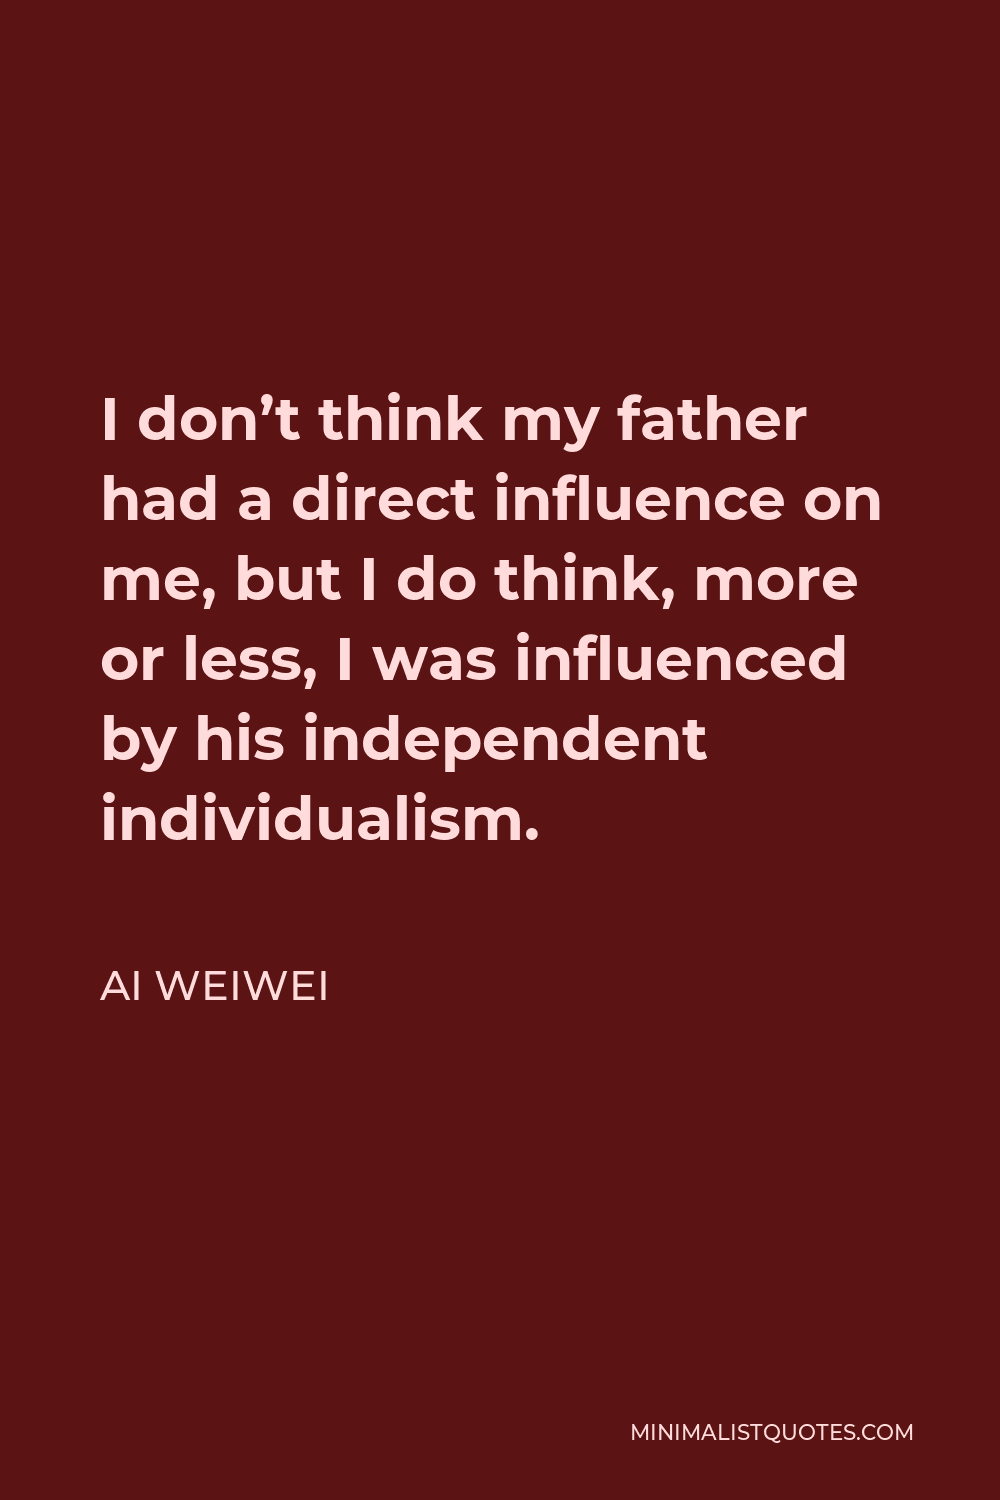 Ai Weiwei Quote - I don’t think my father had a direct influence on me, but I do think, more or less, I was influenced by his independent individualism.